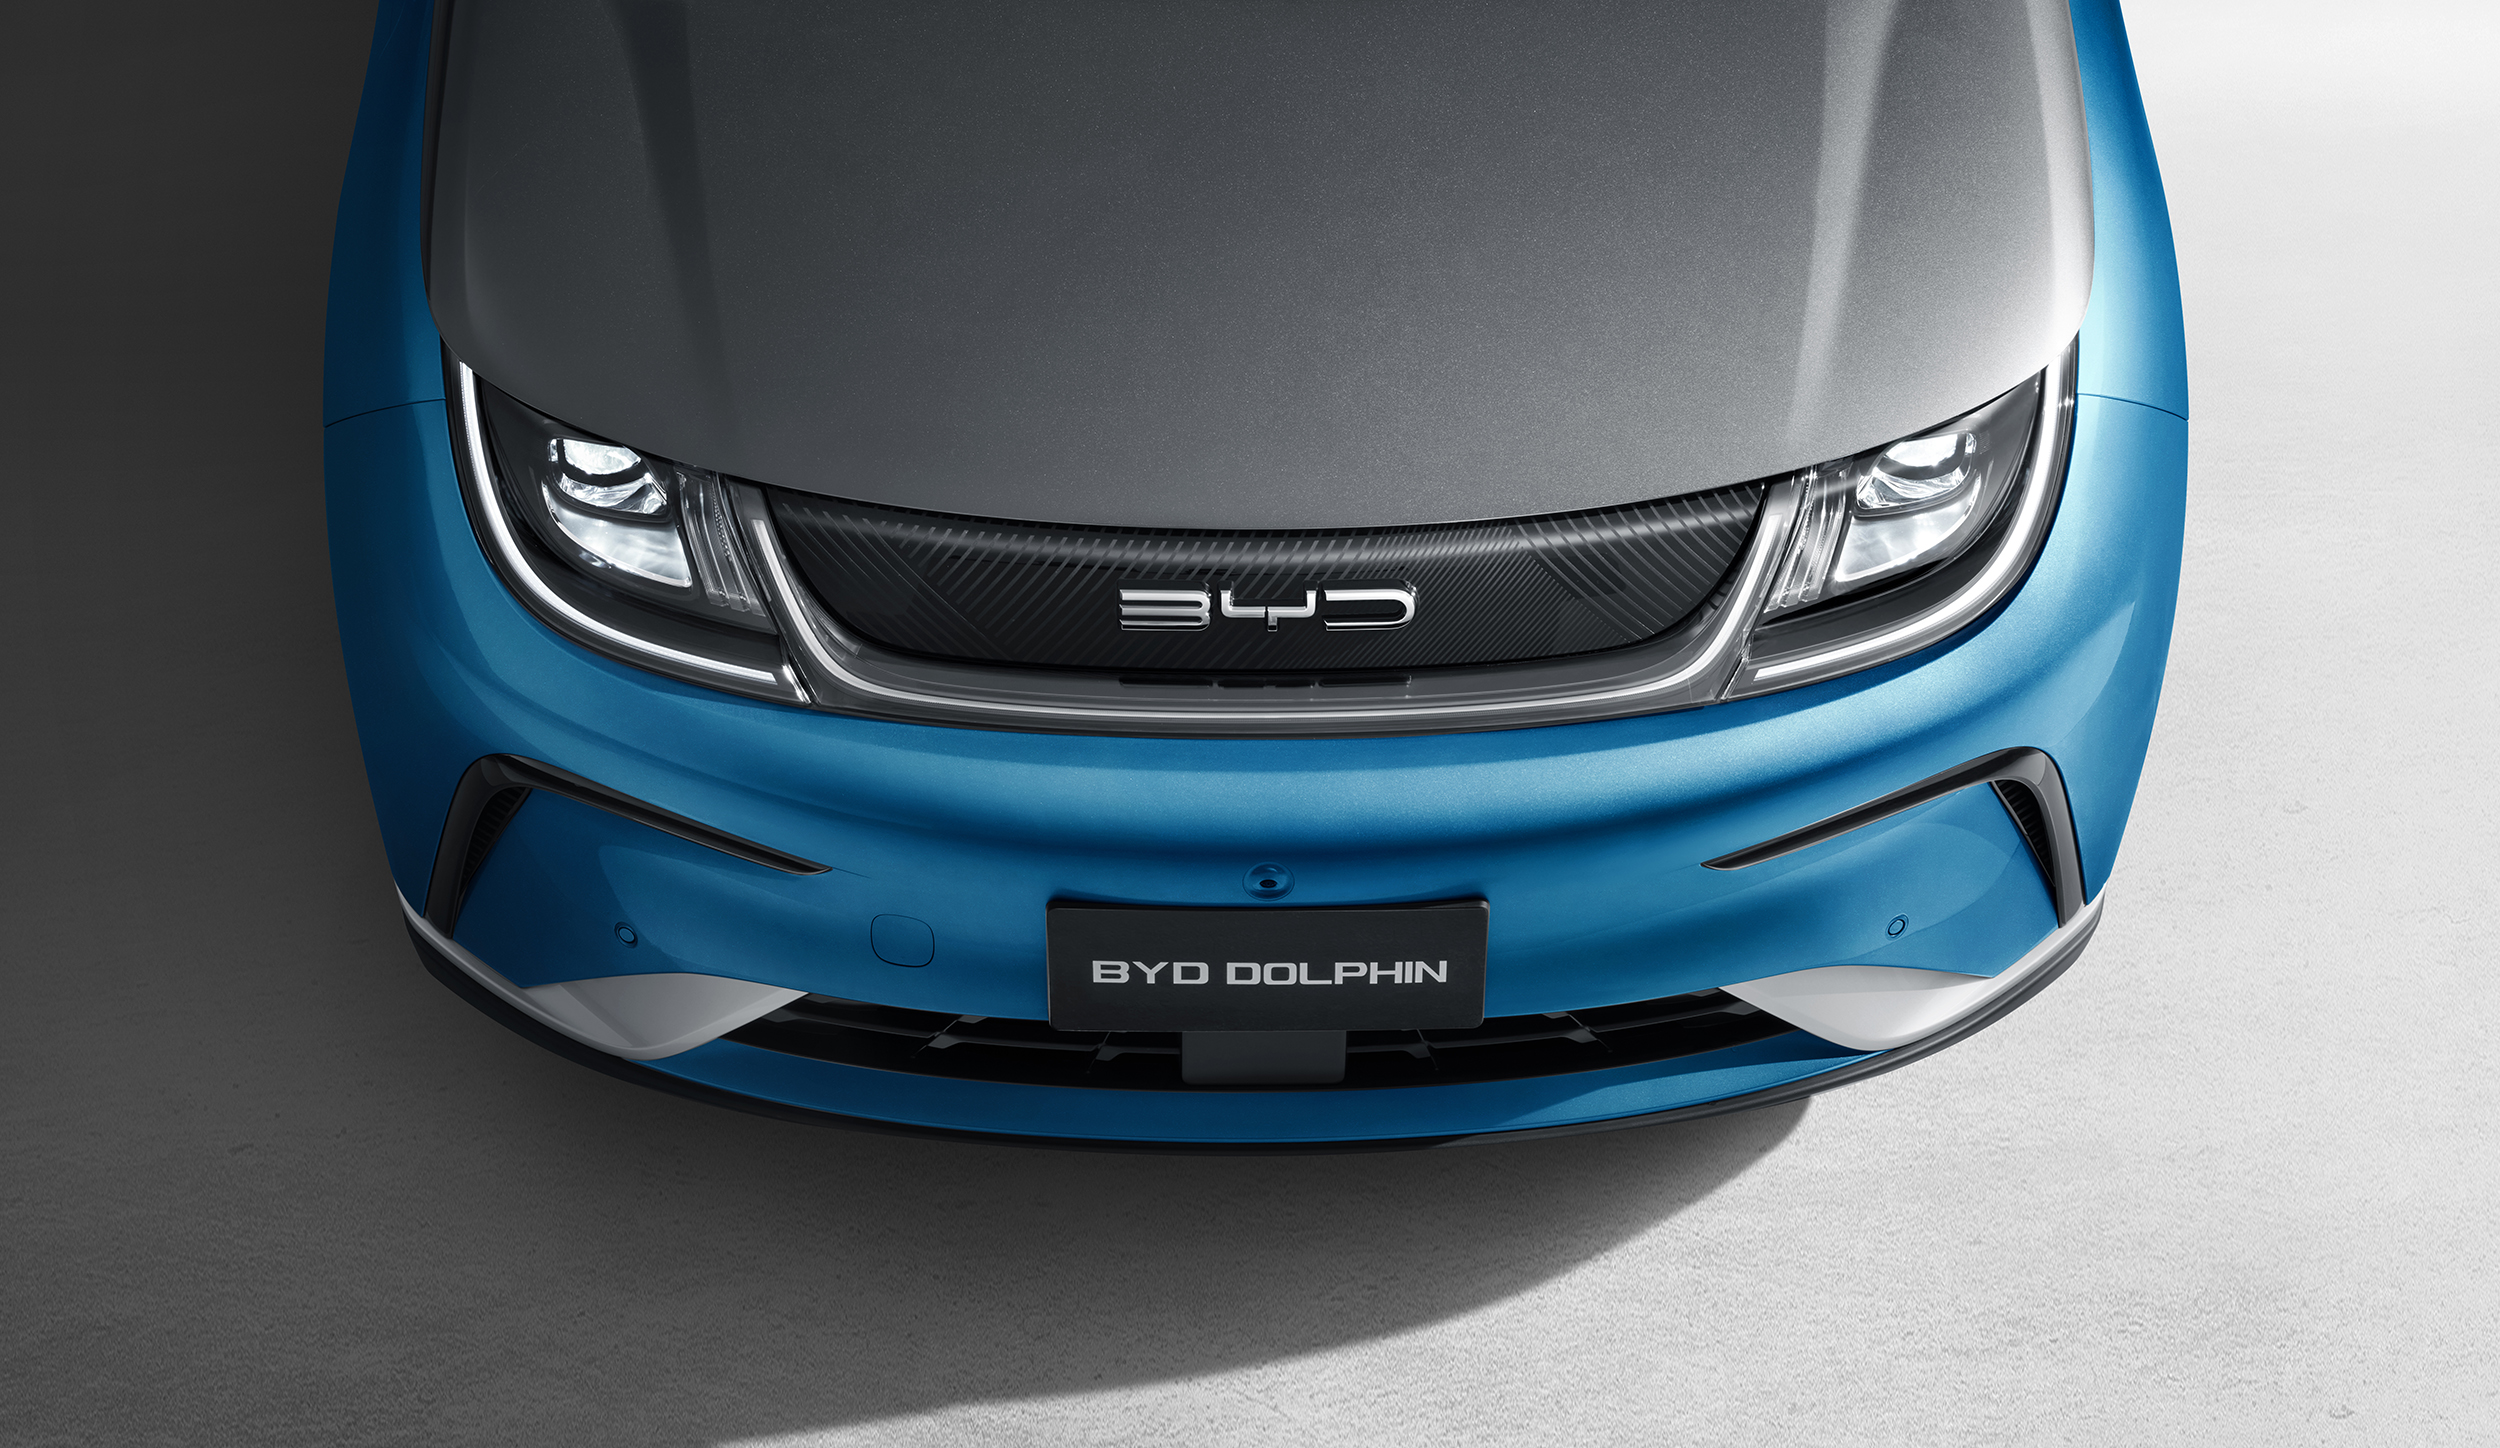 byd dolphin debuts in malaysia; from rm99,900